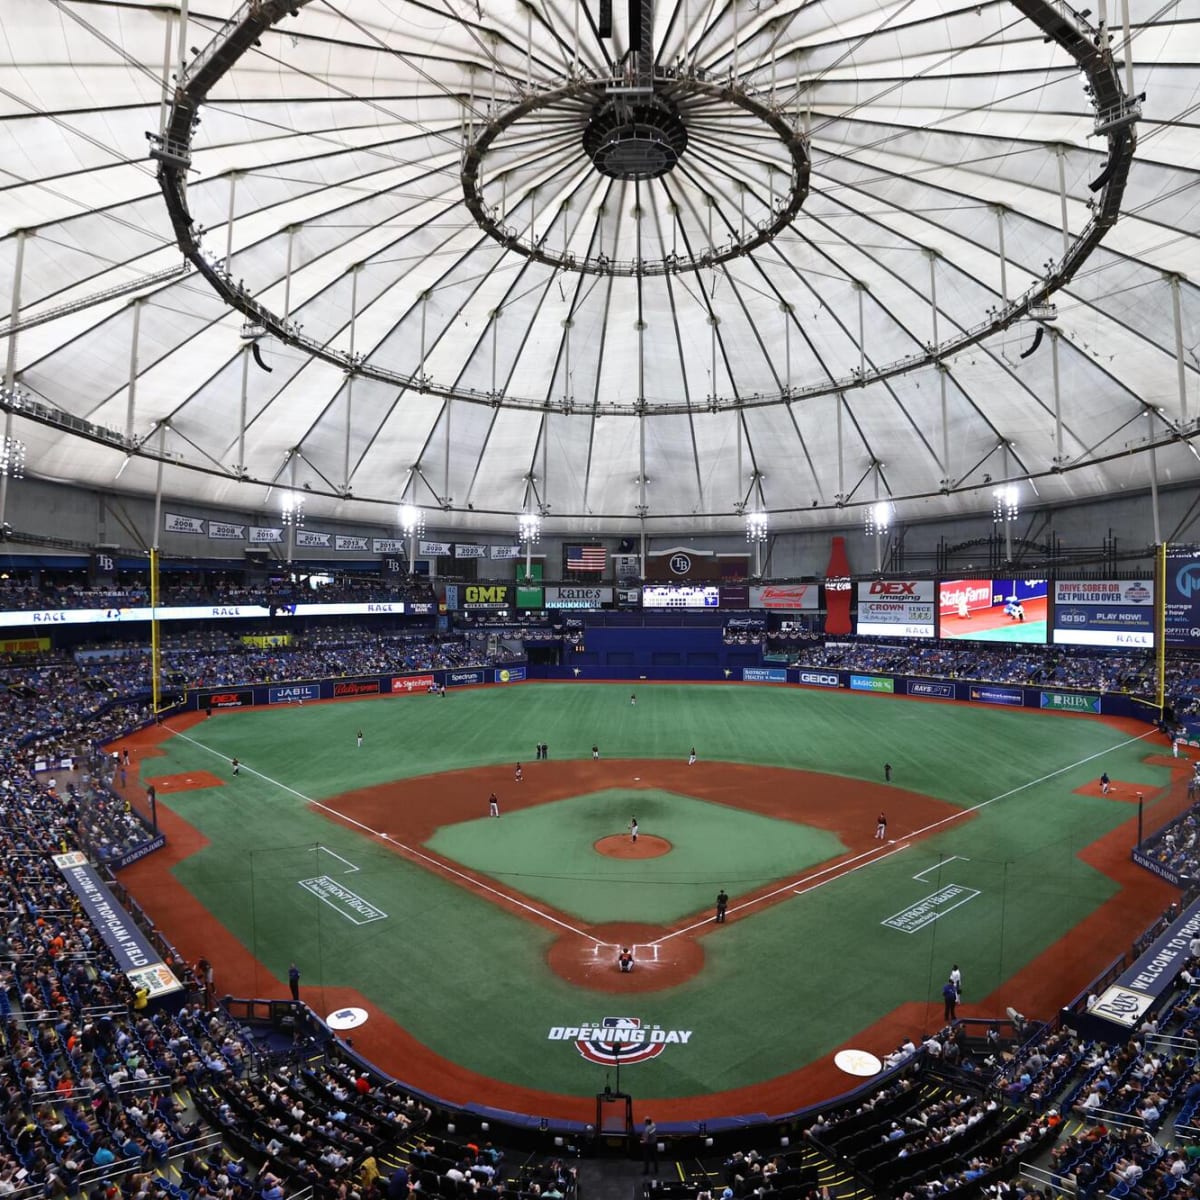 Tampa Bay Rays' home 'sellout' was a tad bit misleading